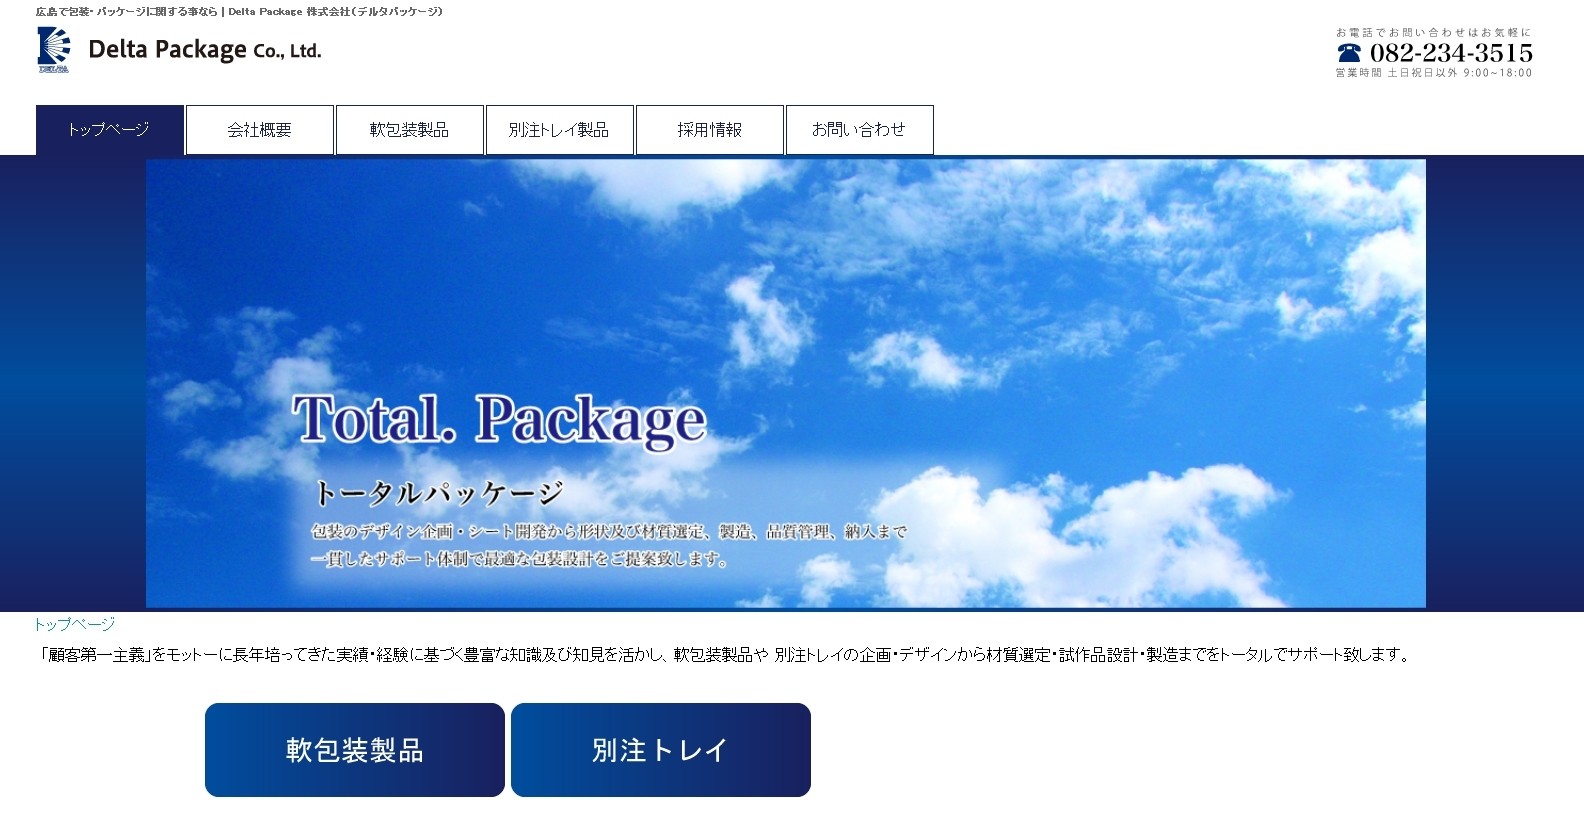 Delta Package株式会社のDelta Package株式会社サービス